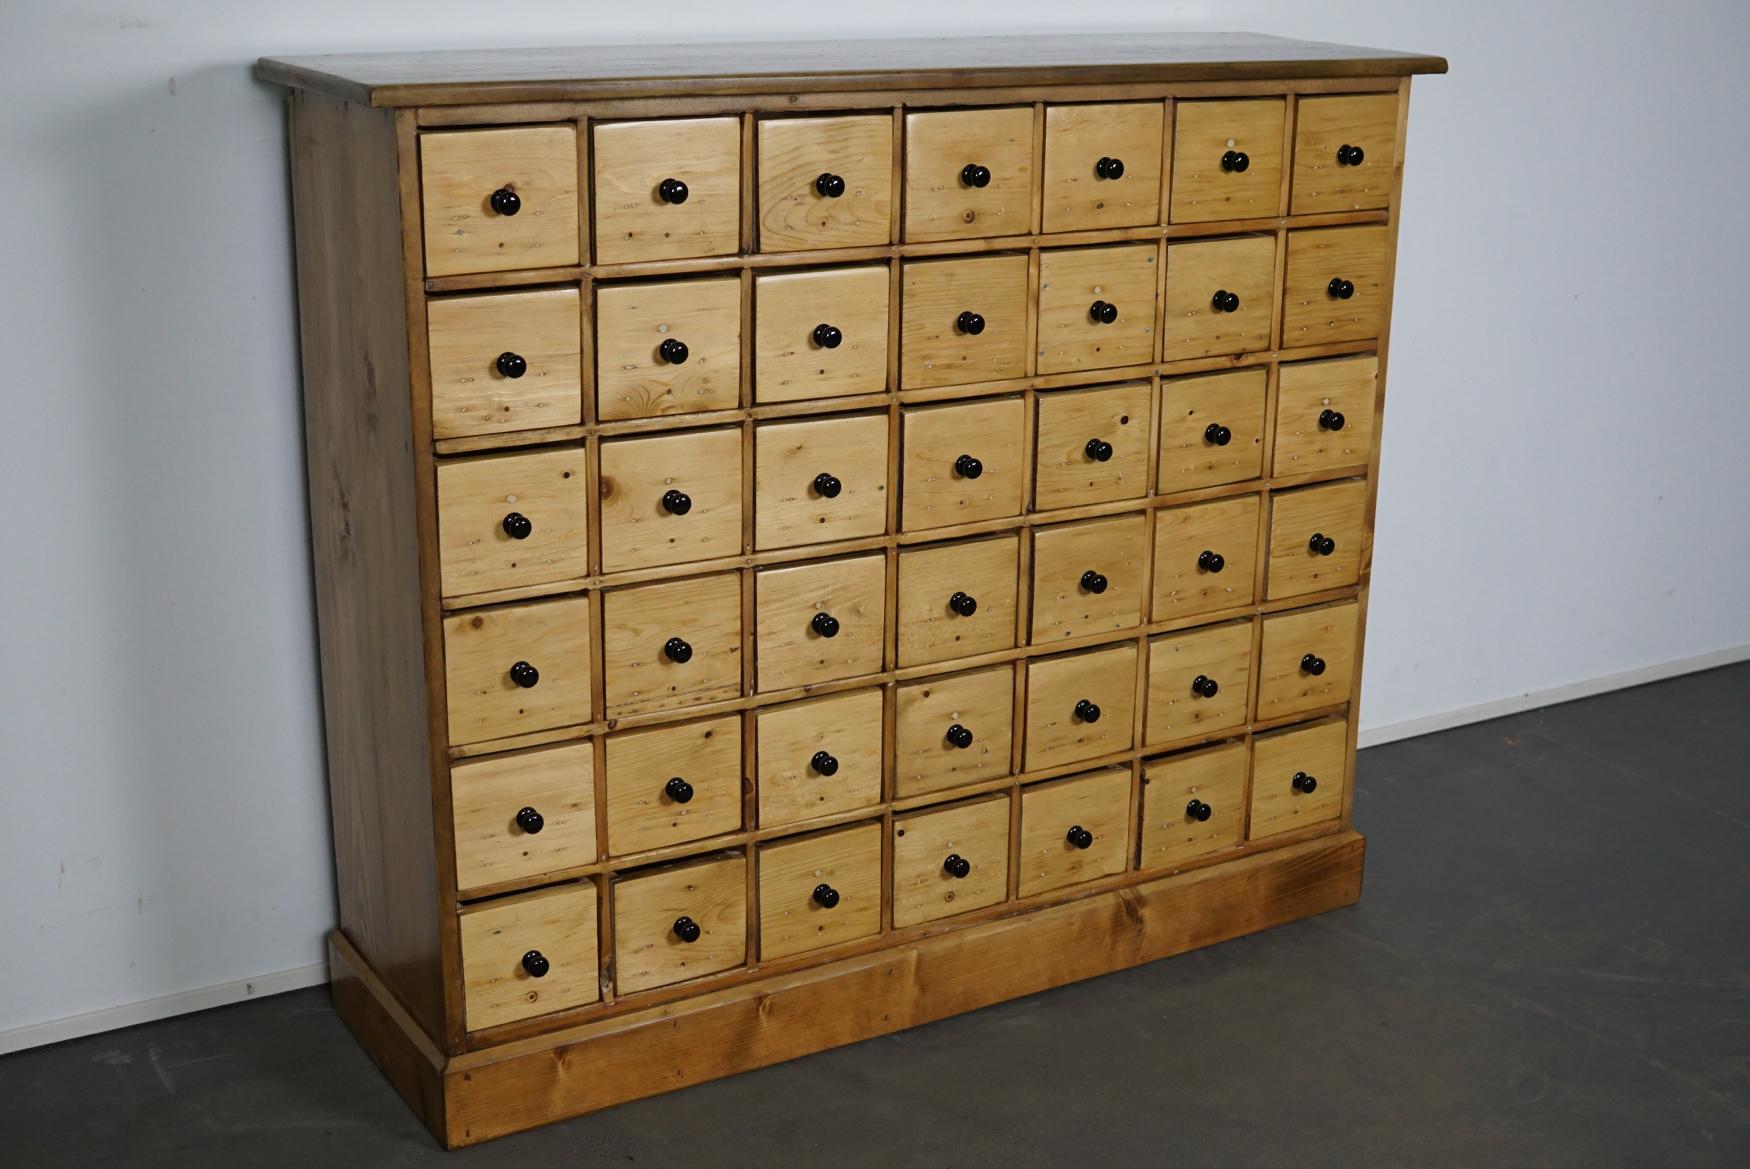 This apothecary cabinet of drawers was designed, circa 1950s in the Netherlands. The piece is made from pine and features 42 drawers with black knobs. The interior dimensions of the drawers are: D 25 x W 11.5 x H 10.5 cm.